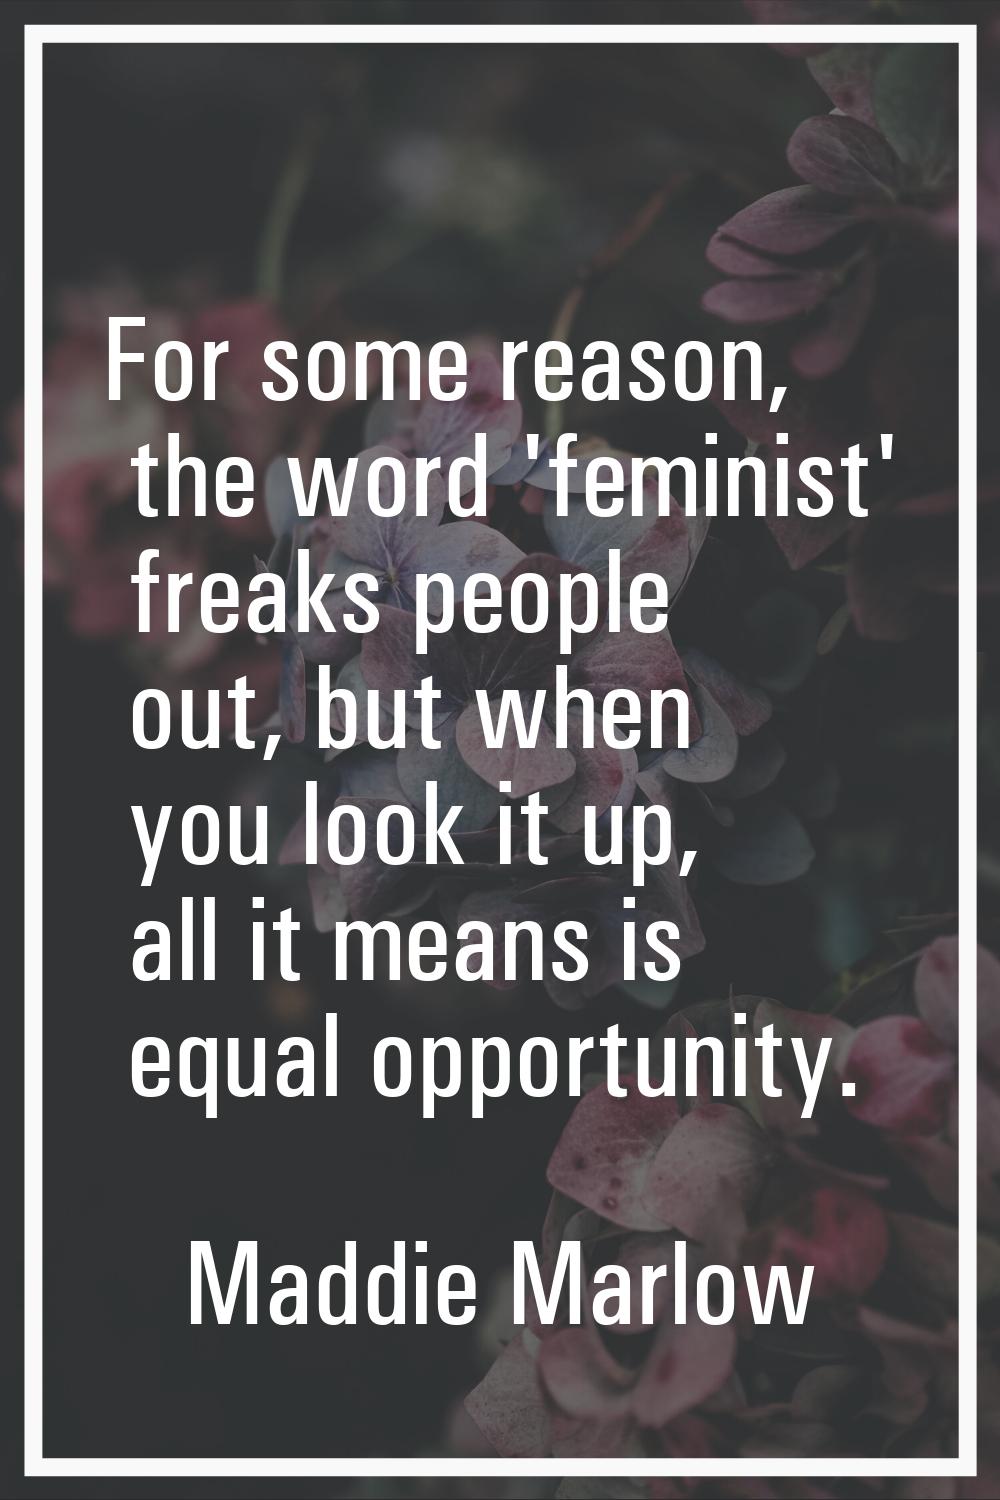 For some reason, the word 'feminist' freaks people out, but when you look it up, all it means is eq